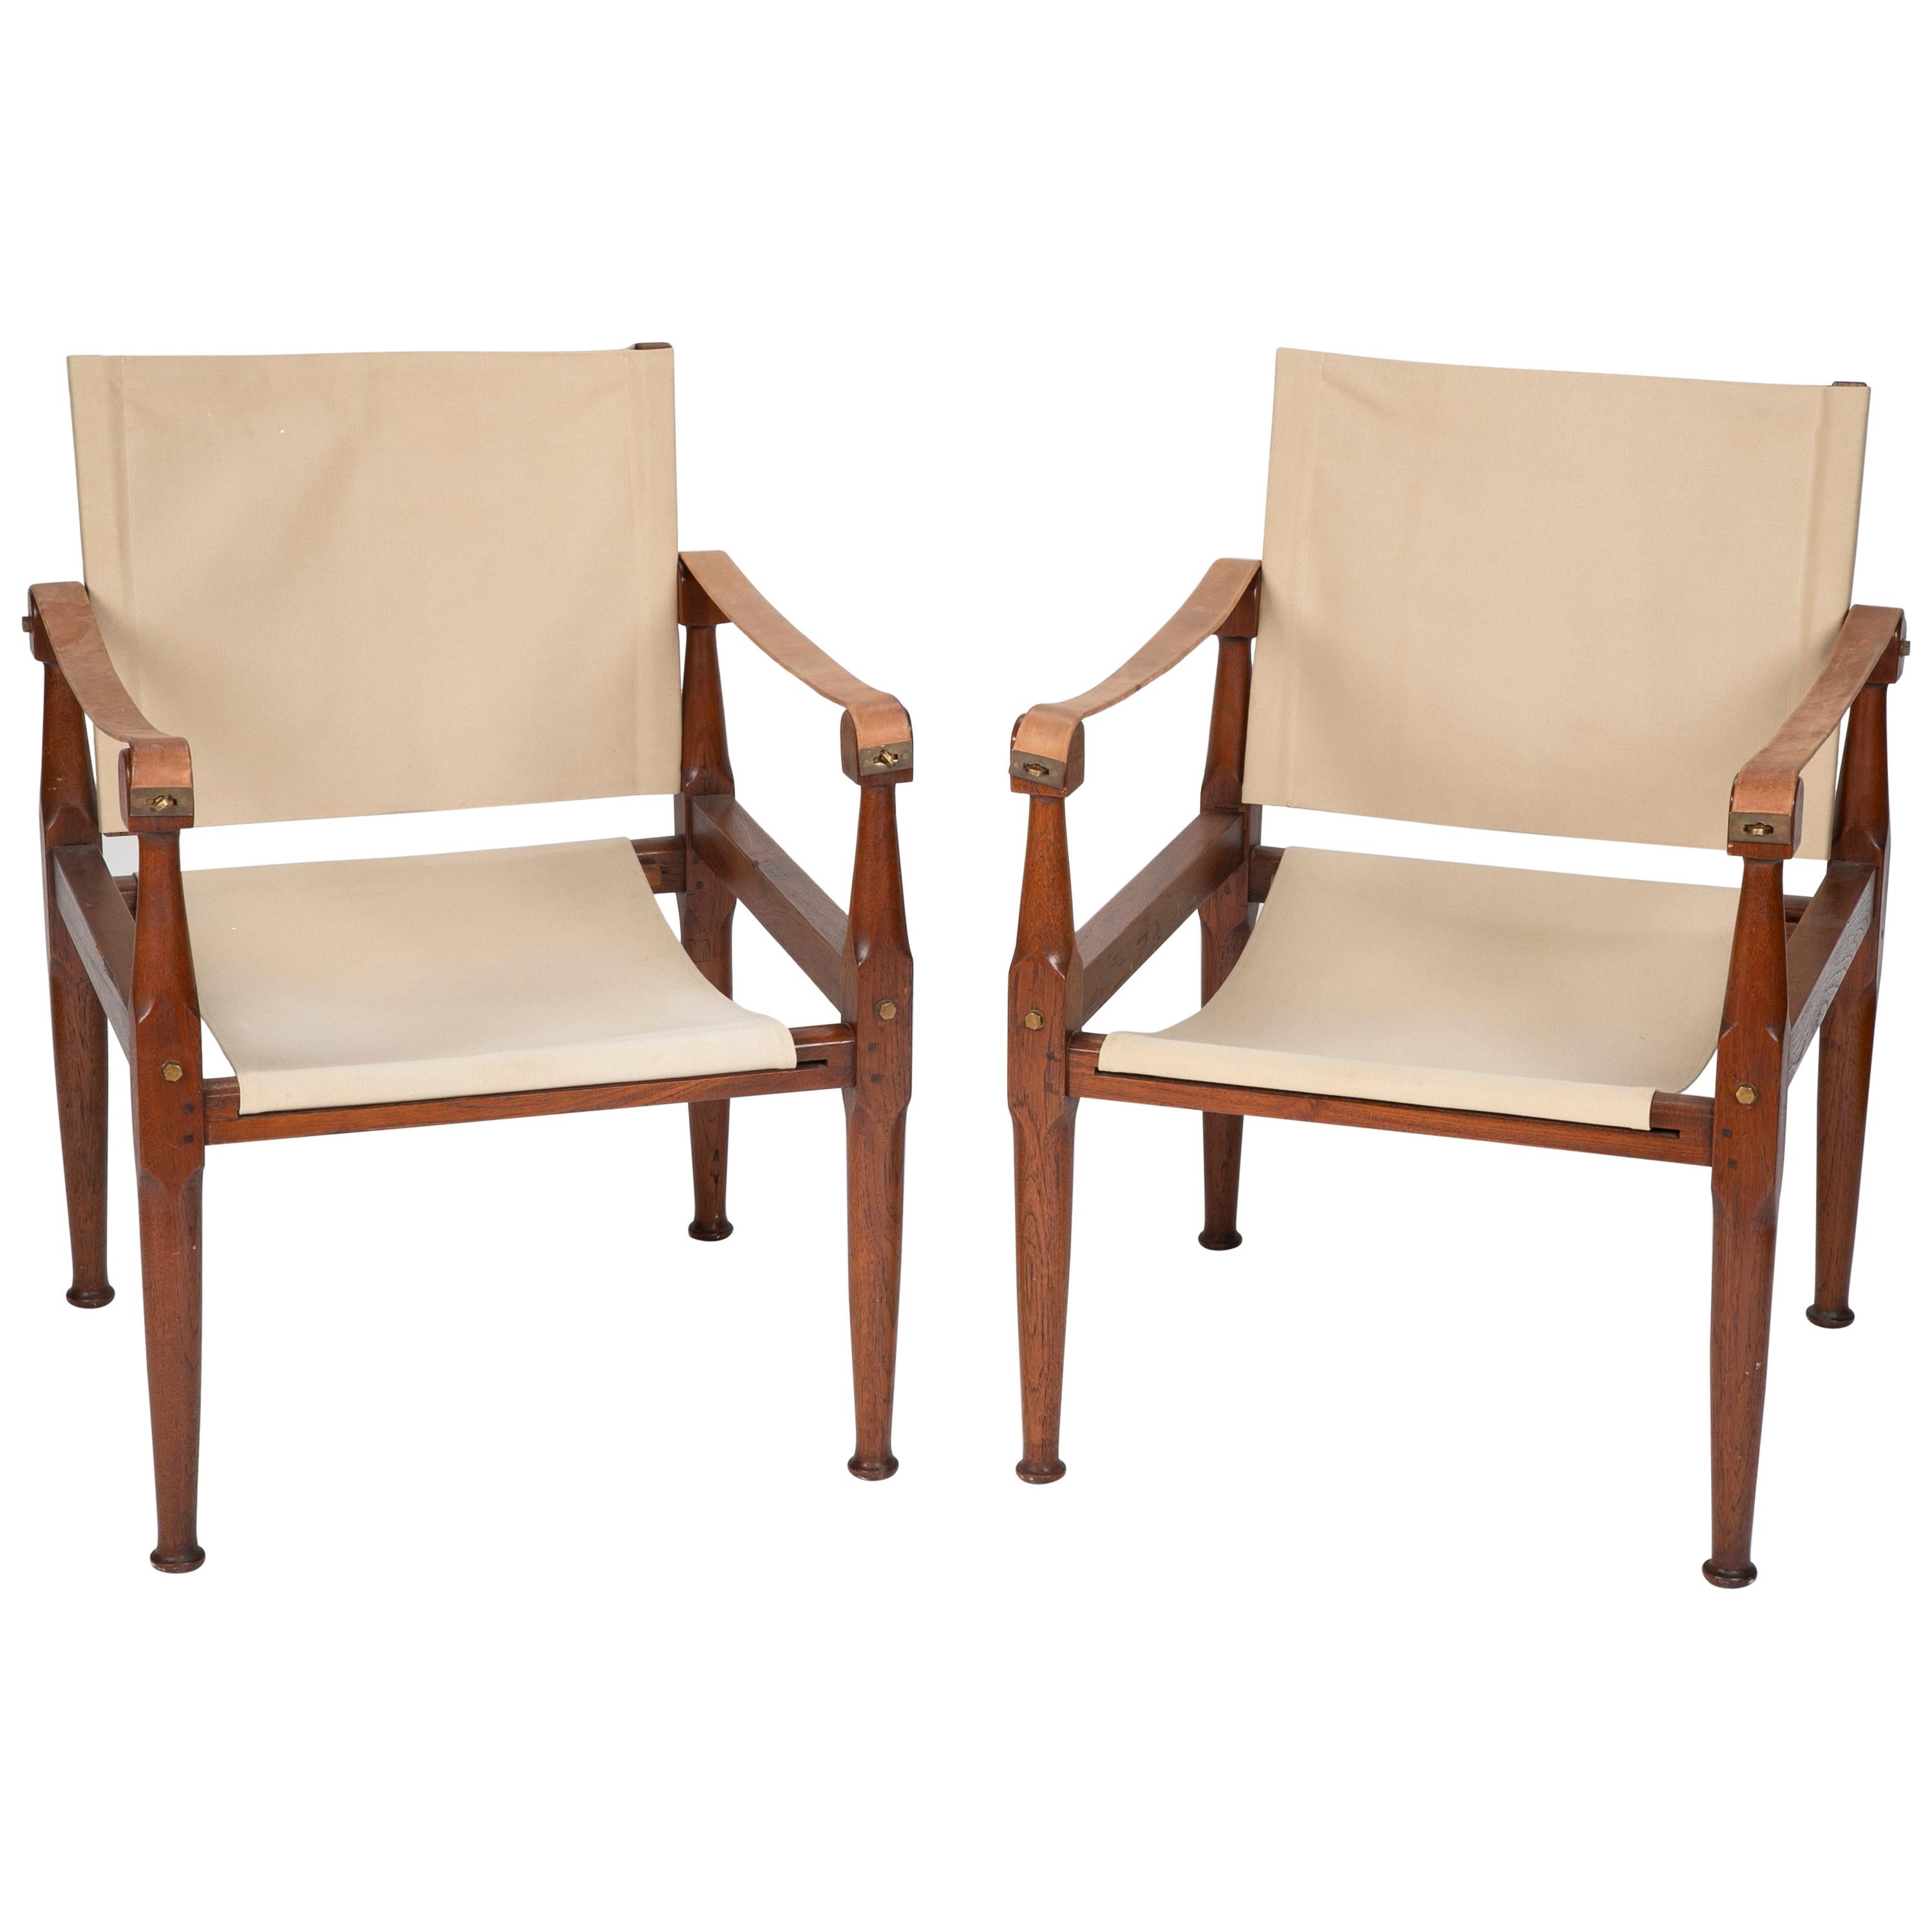 Pair of Campaign Chairs in the Manner of Karre Klint